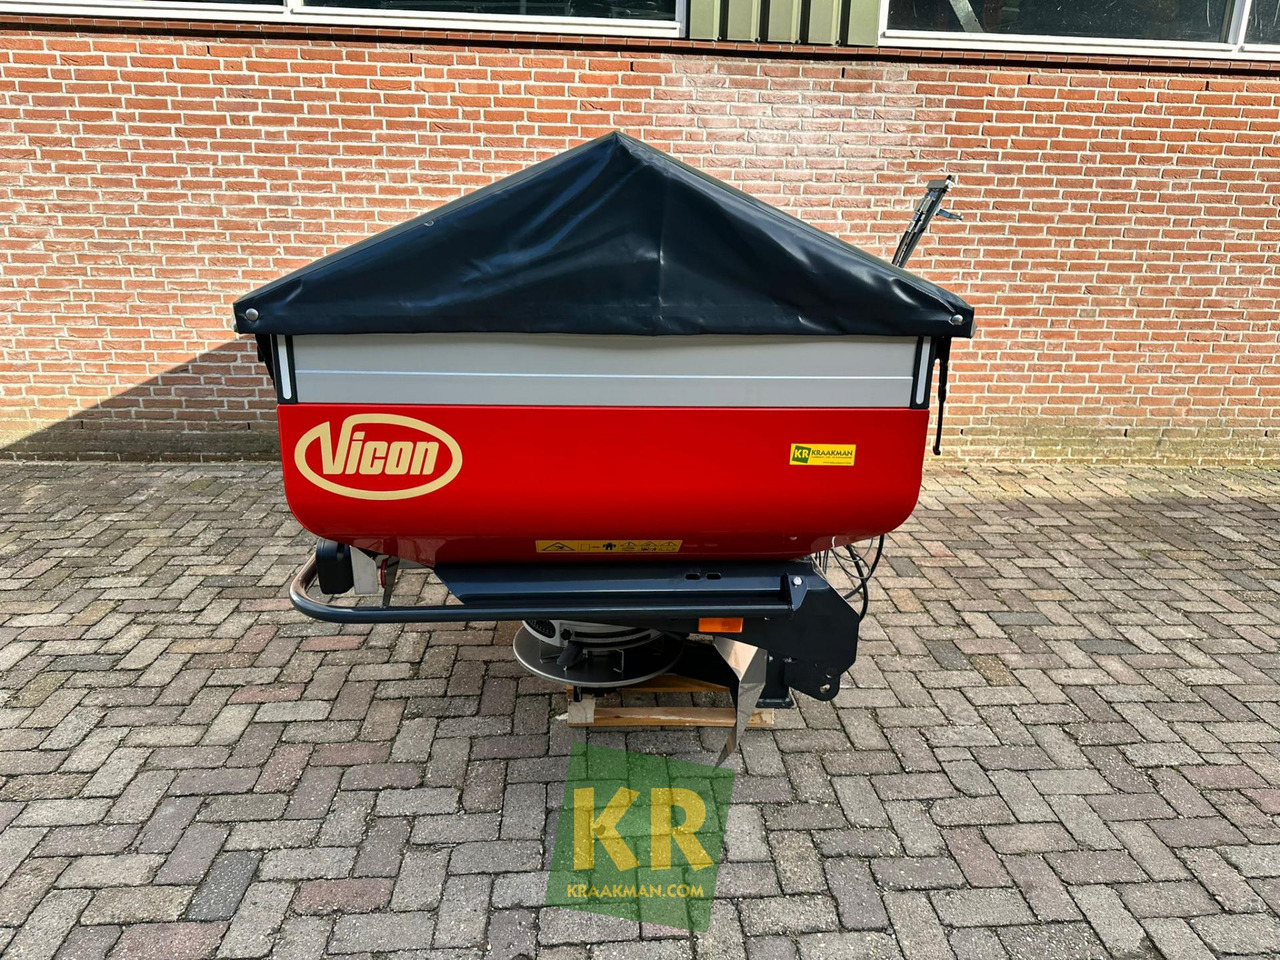 Kunstmeststrooier RO-M 1550 Vicon